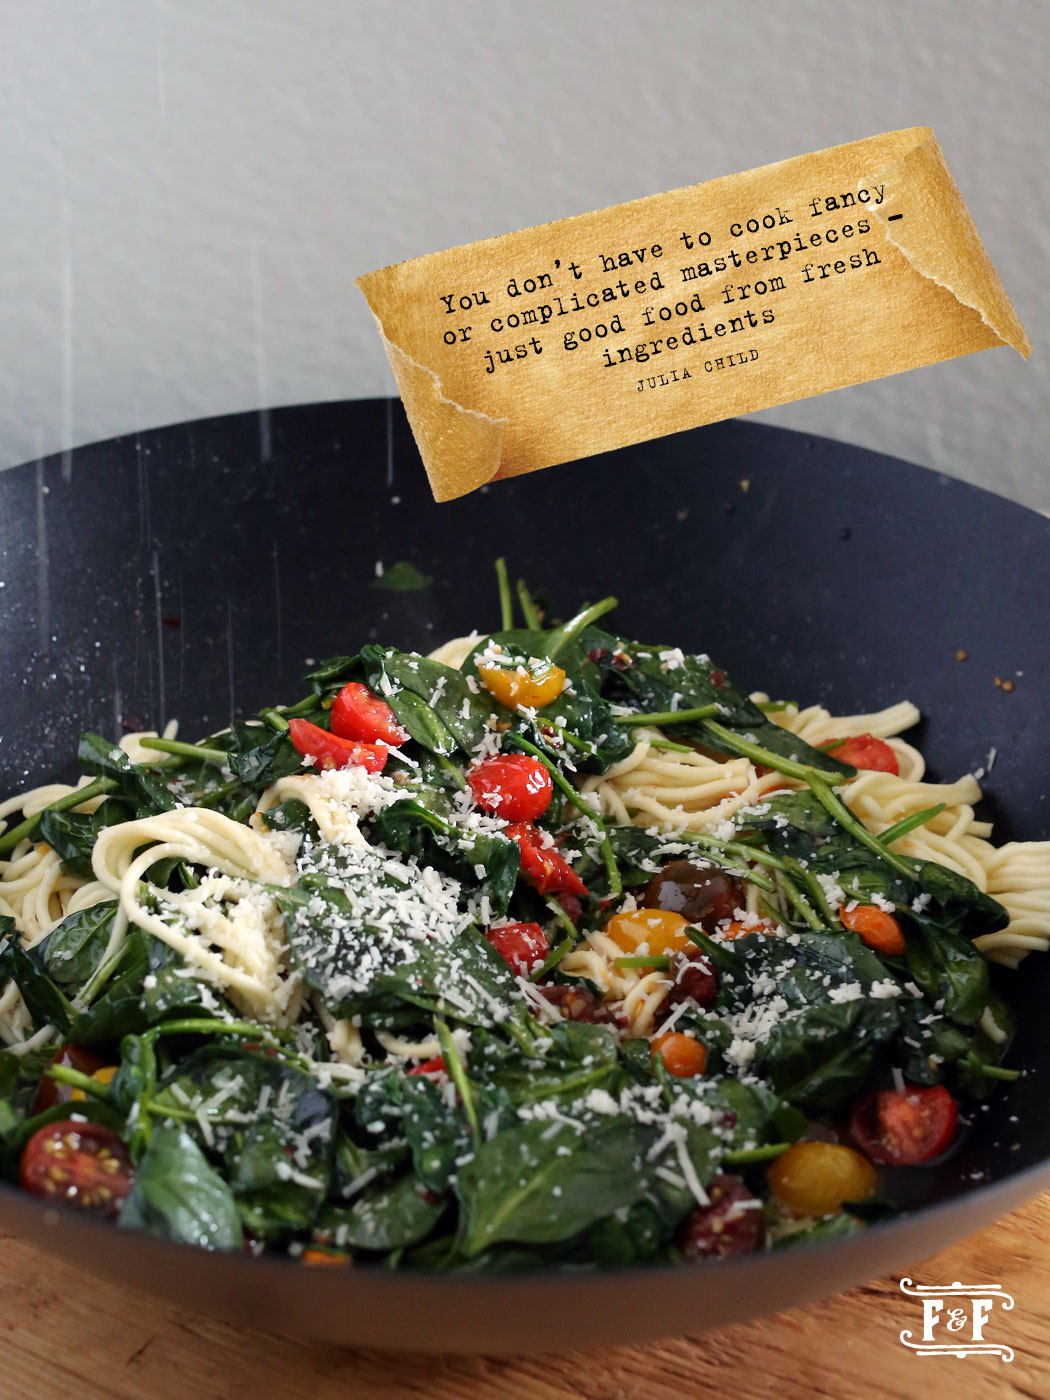  Gluten Free Pasta with Lemony Spinach & Parm